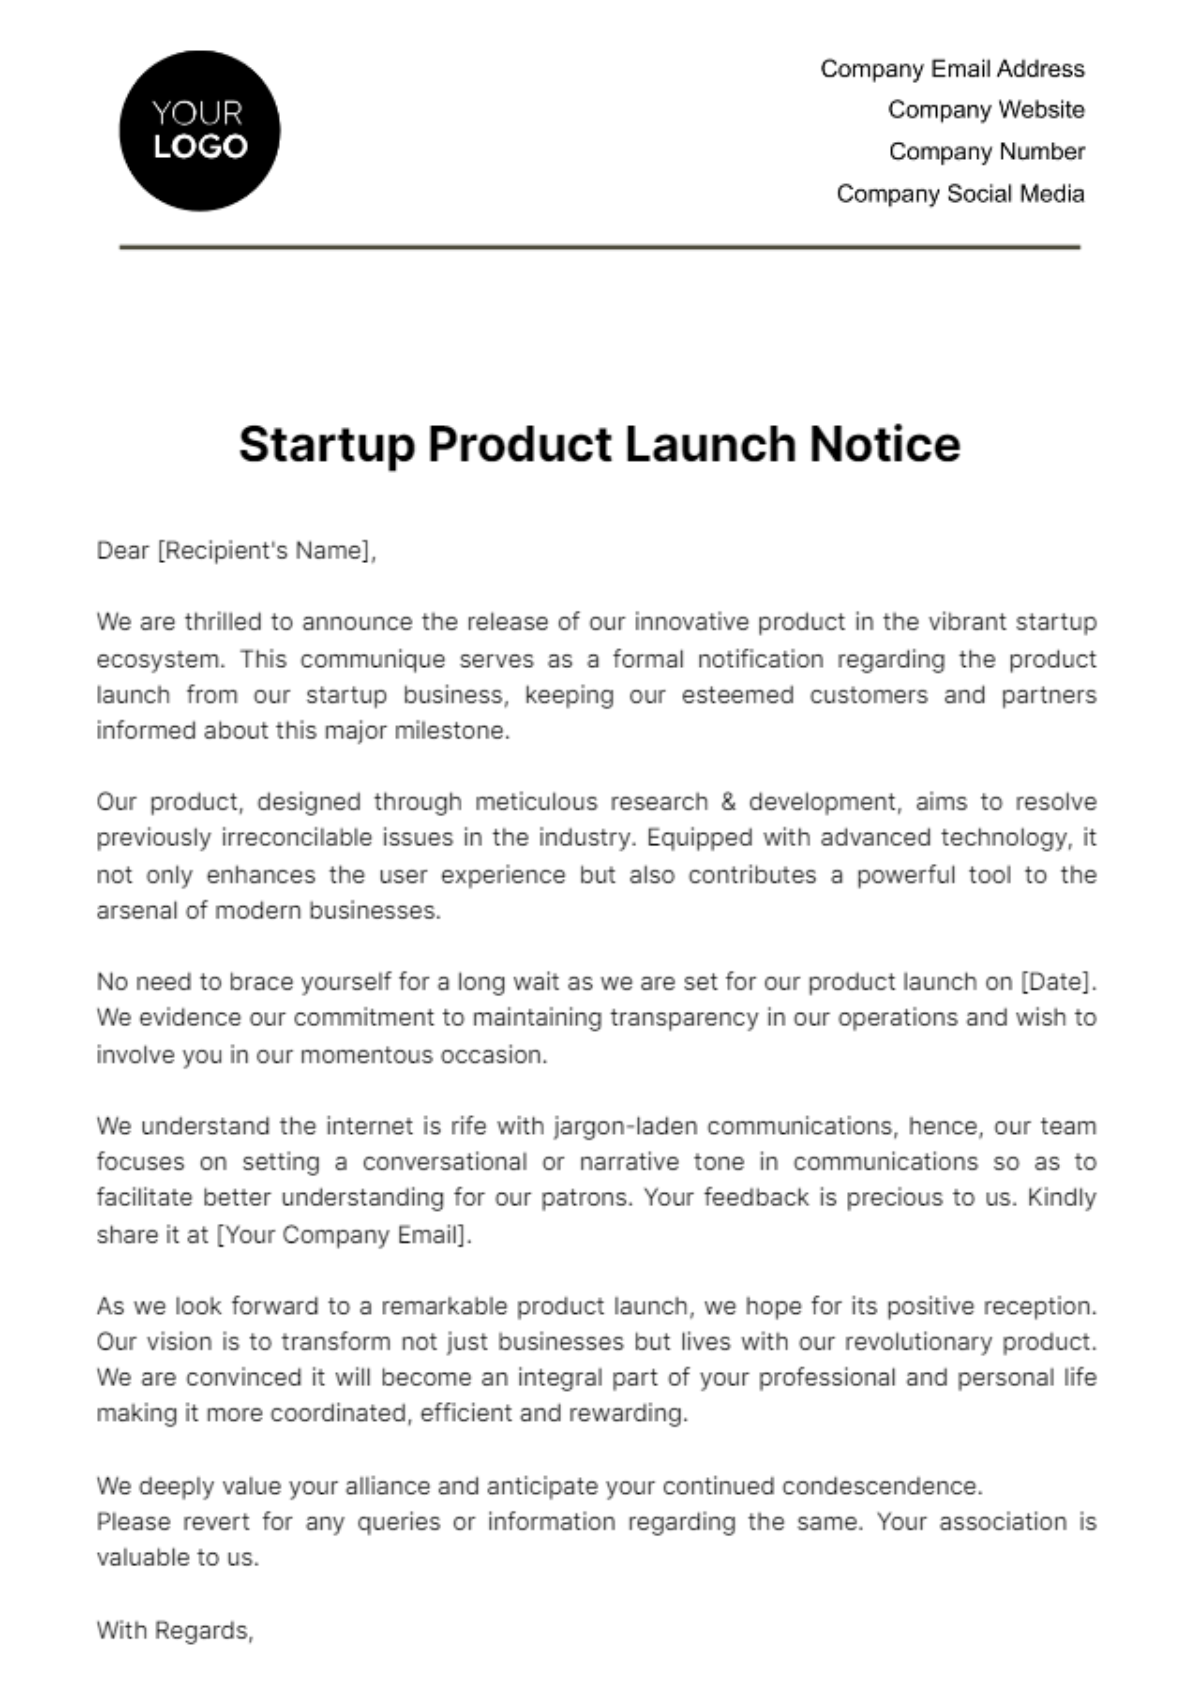 Startup Product Launch Notice Template